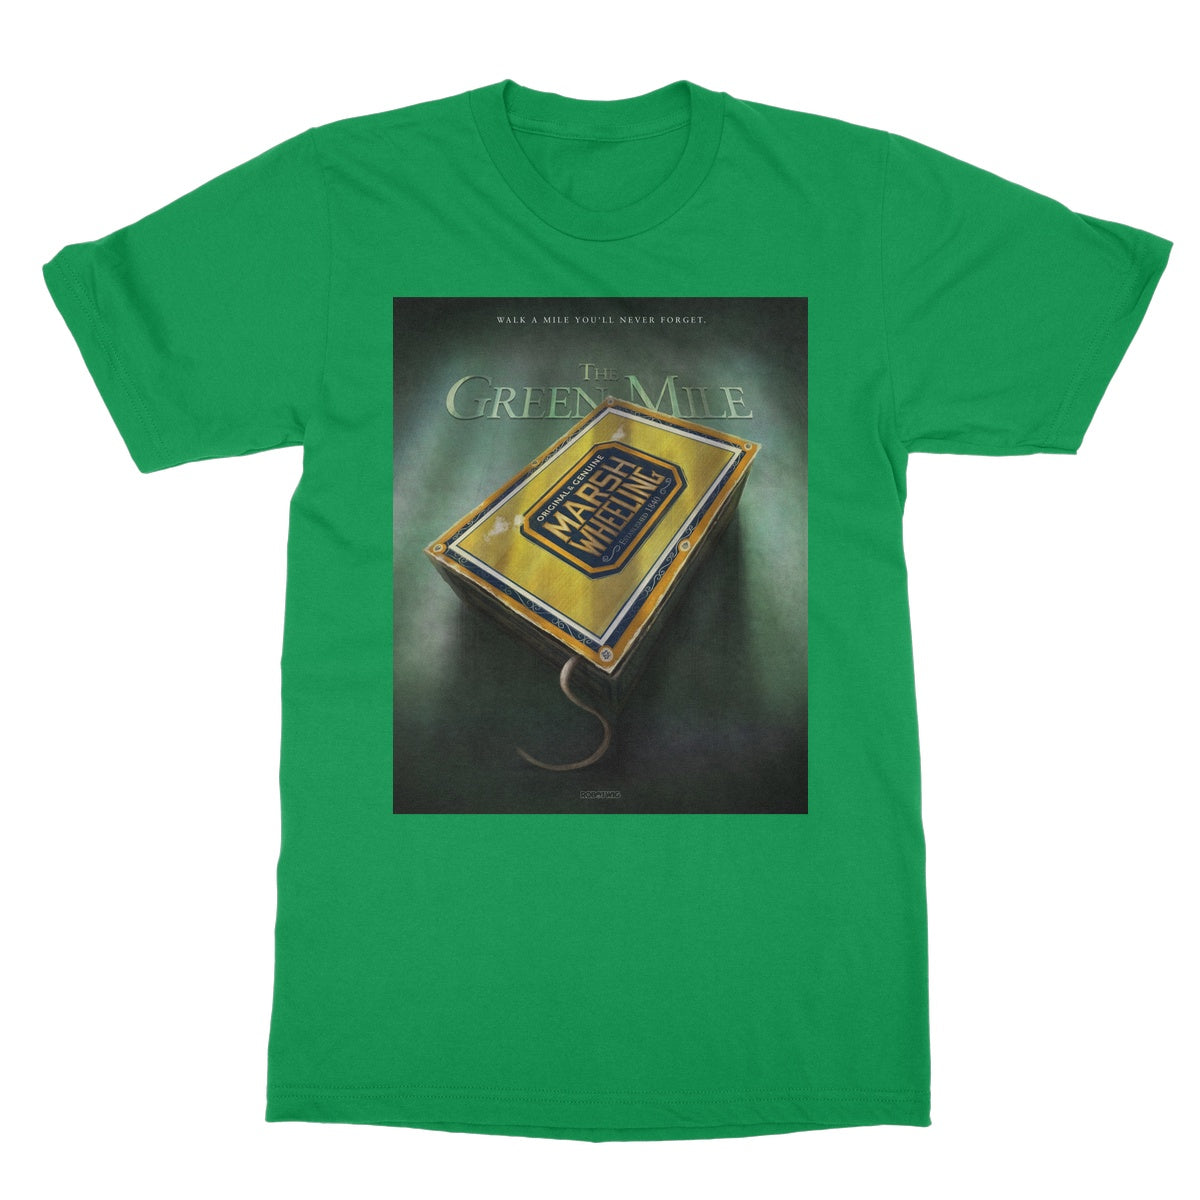 Green Mile Illustrated Softstyle T-Shirt